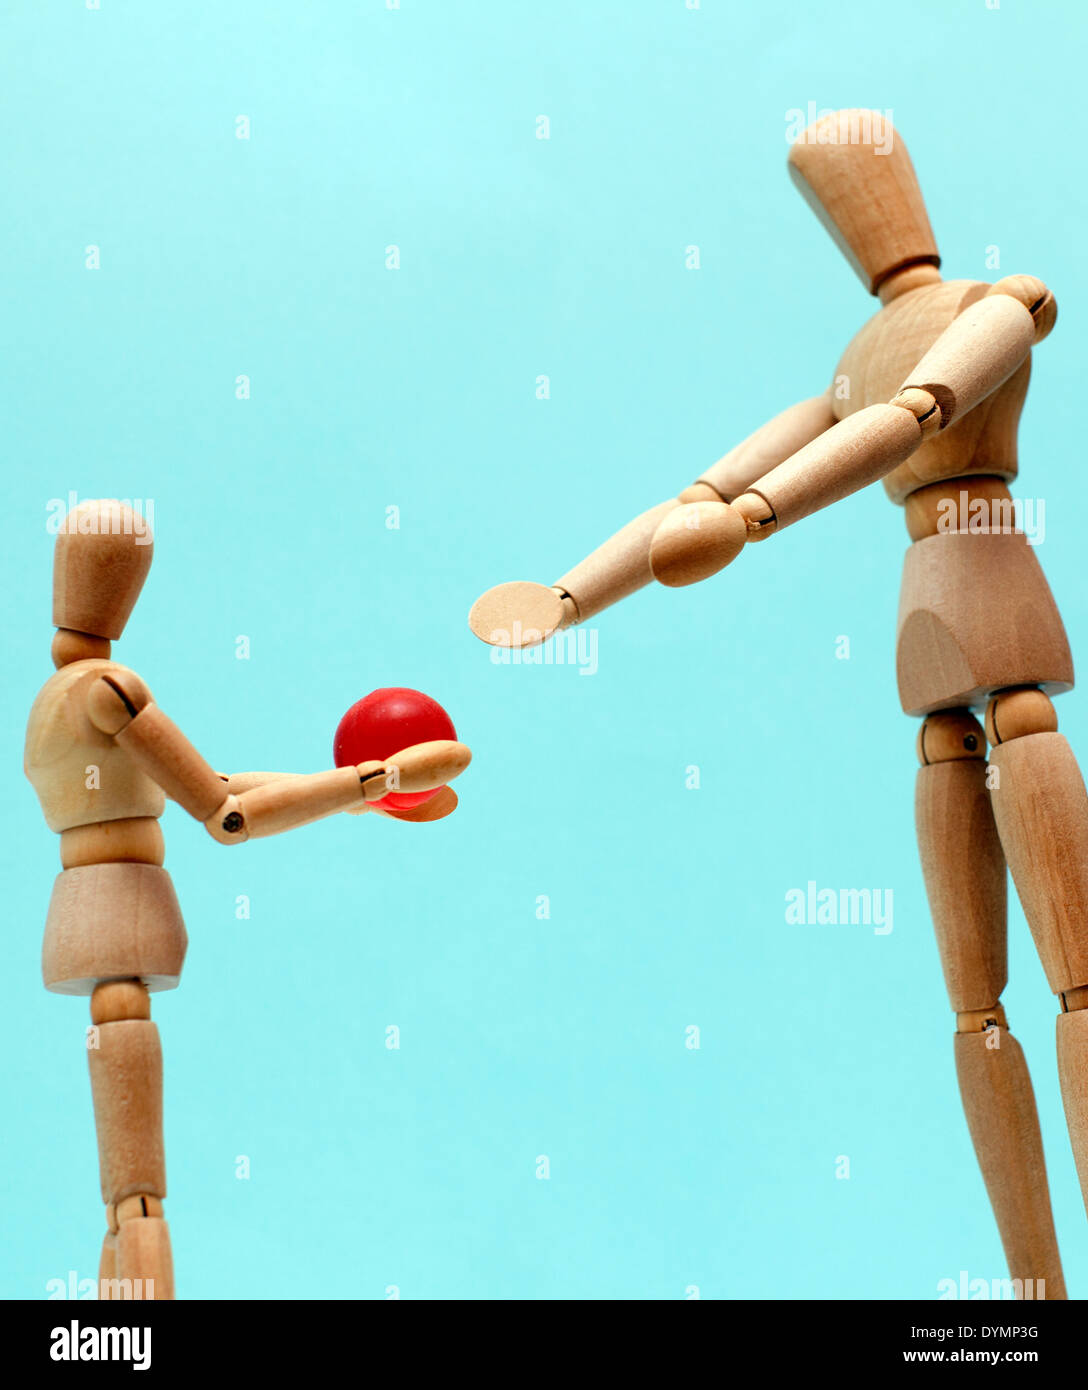 Parent and child playing with ball represented by wooden mannequins, London Stock Photo